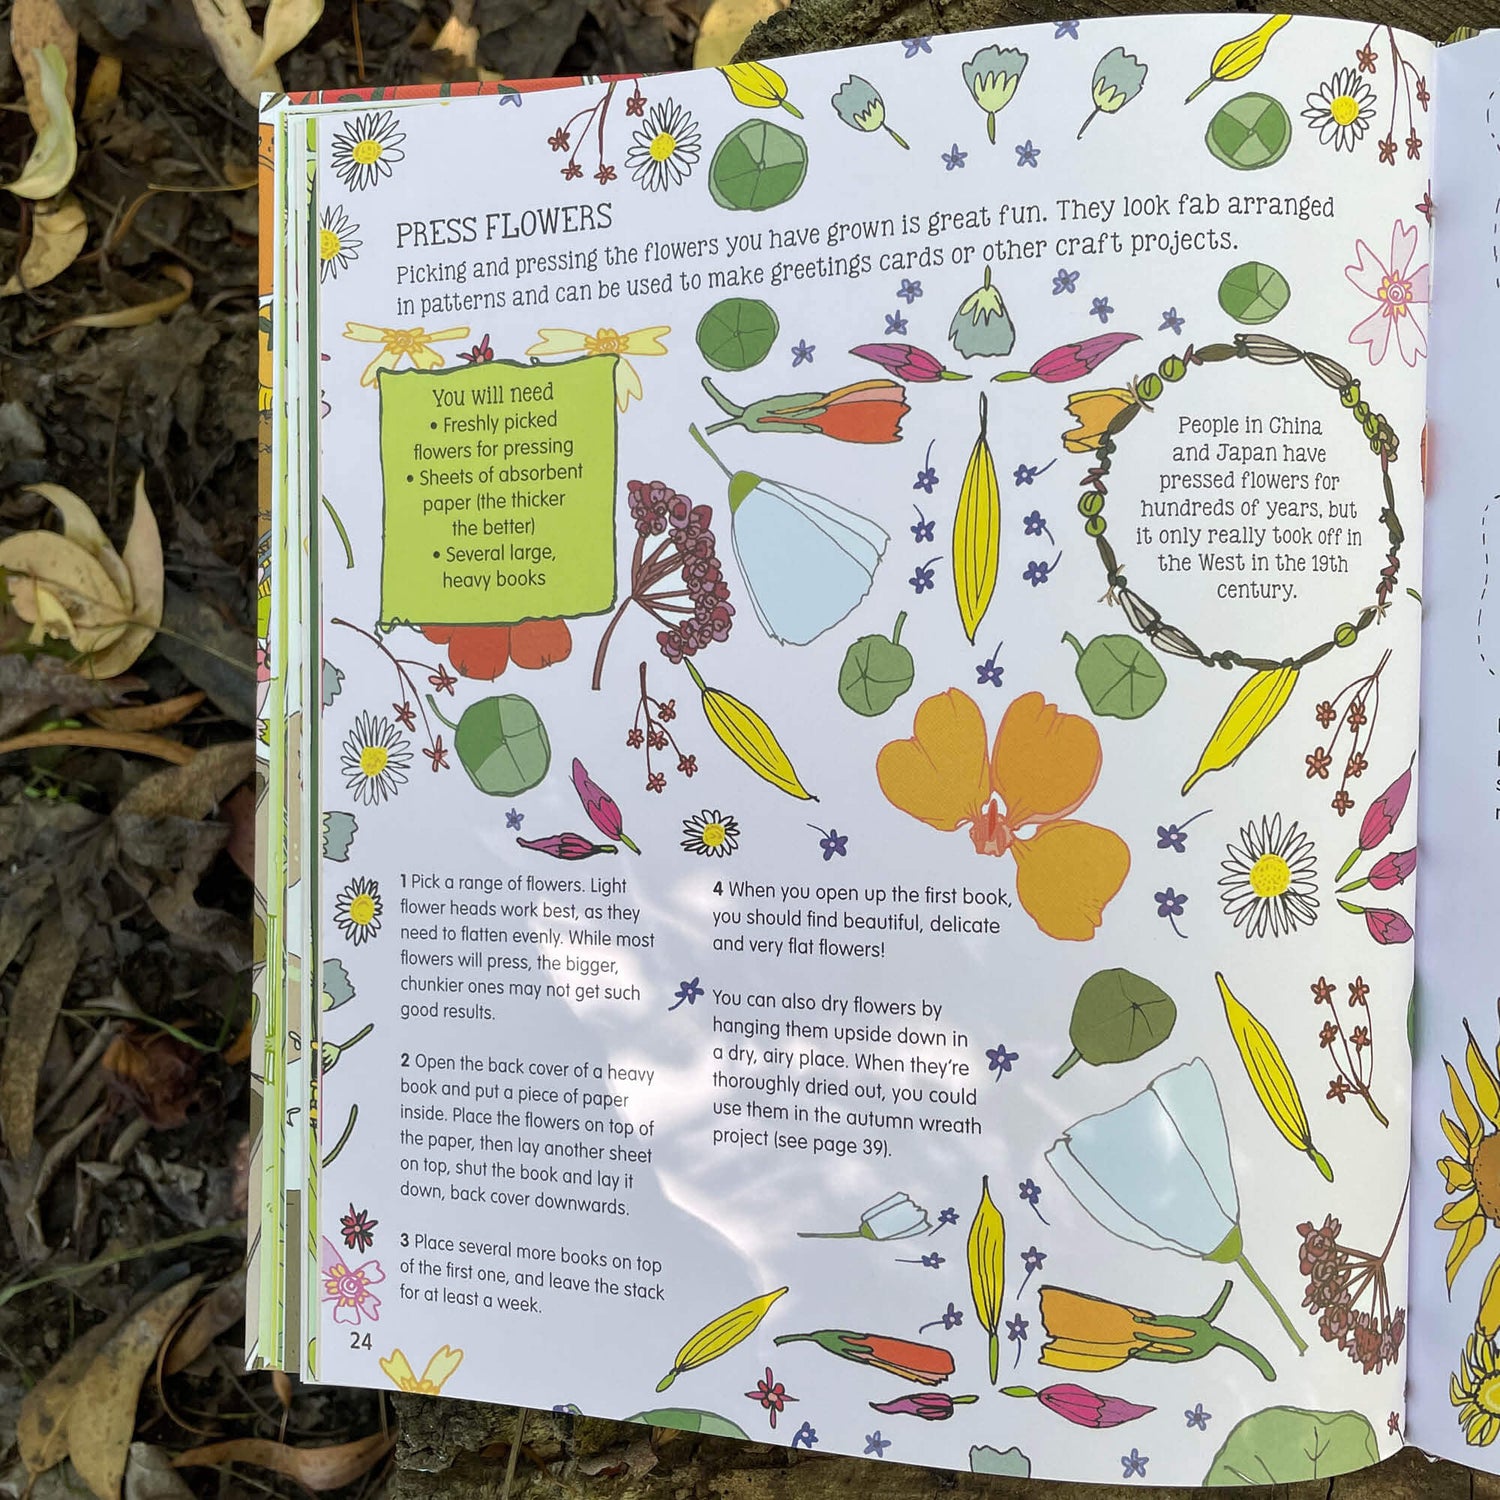 Pages about pressing flowers from Plant, Sow, Make and Grow kids gardening book by Esther Coombs from Your Wild Books.